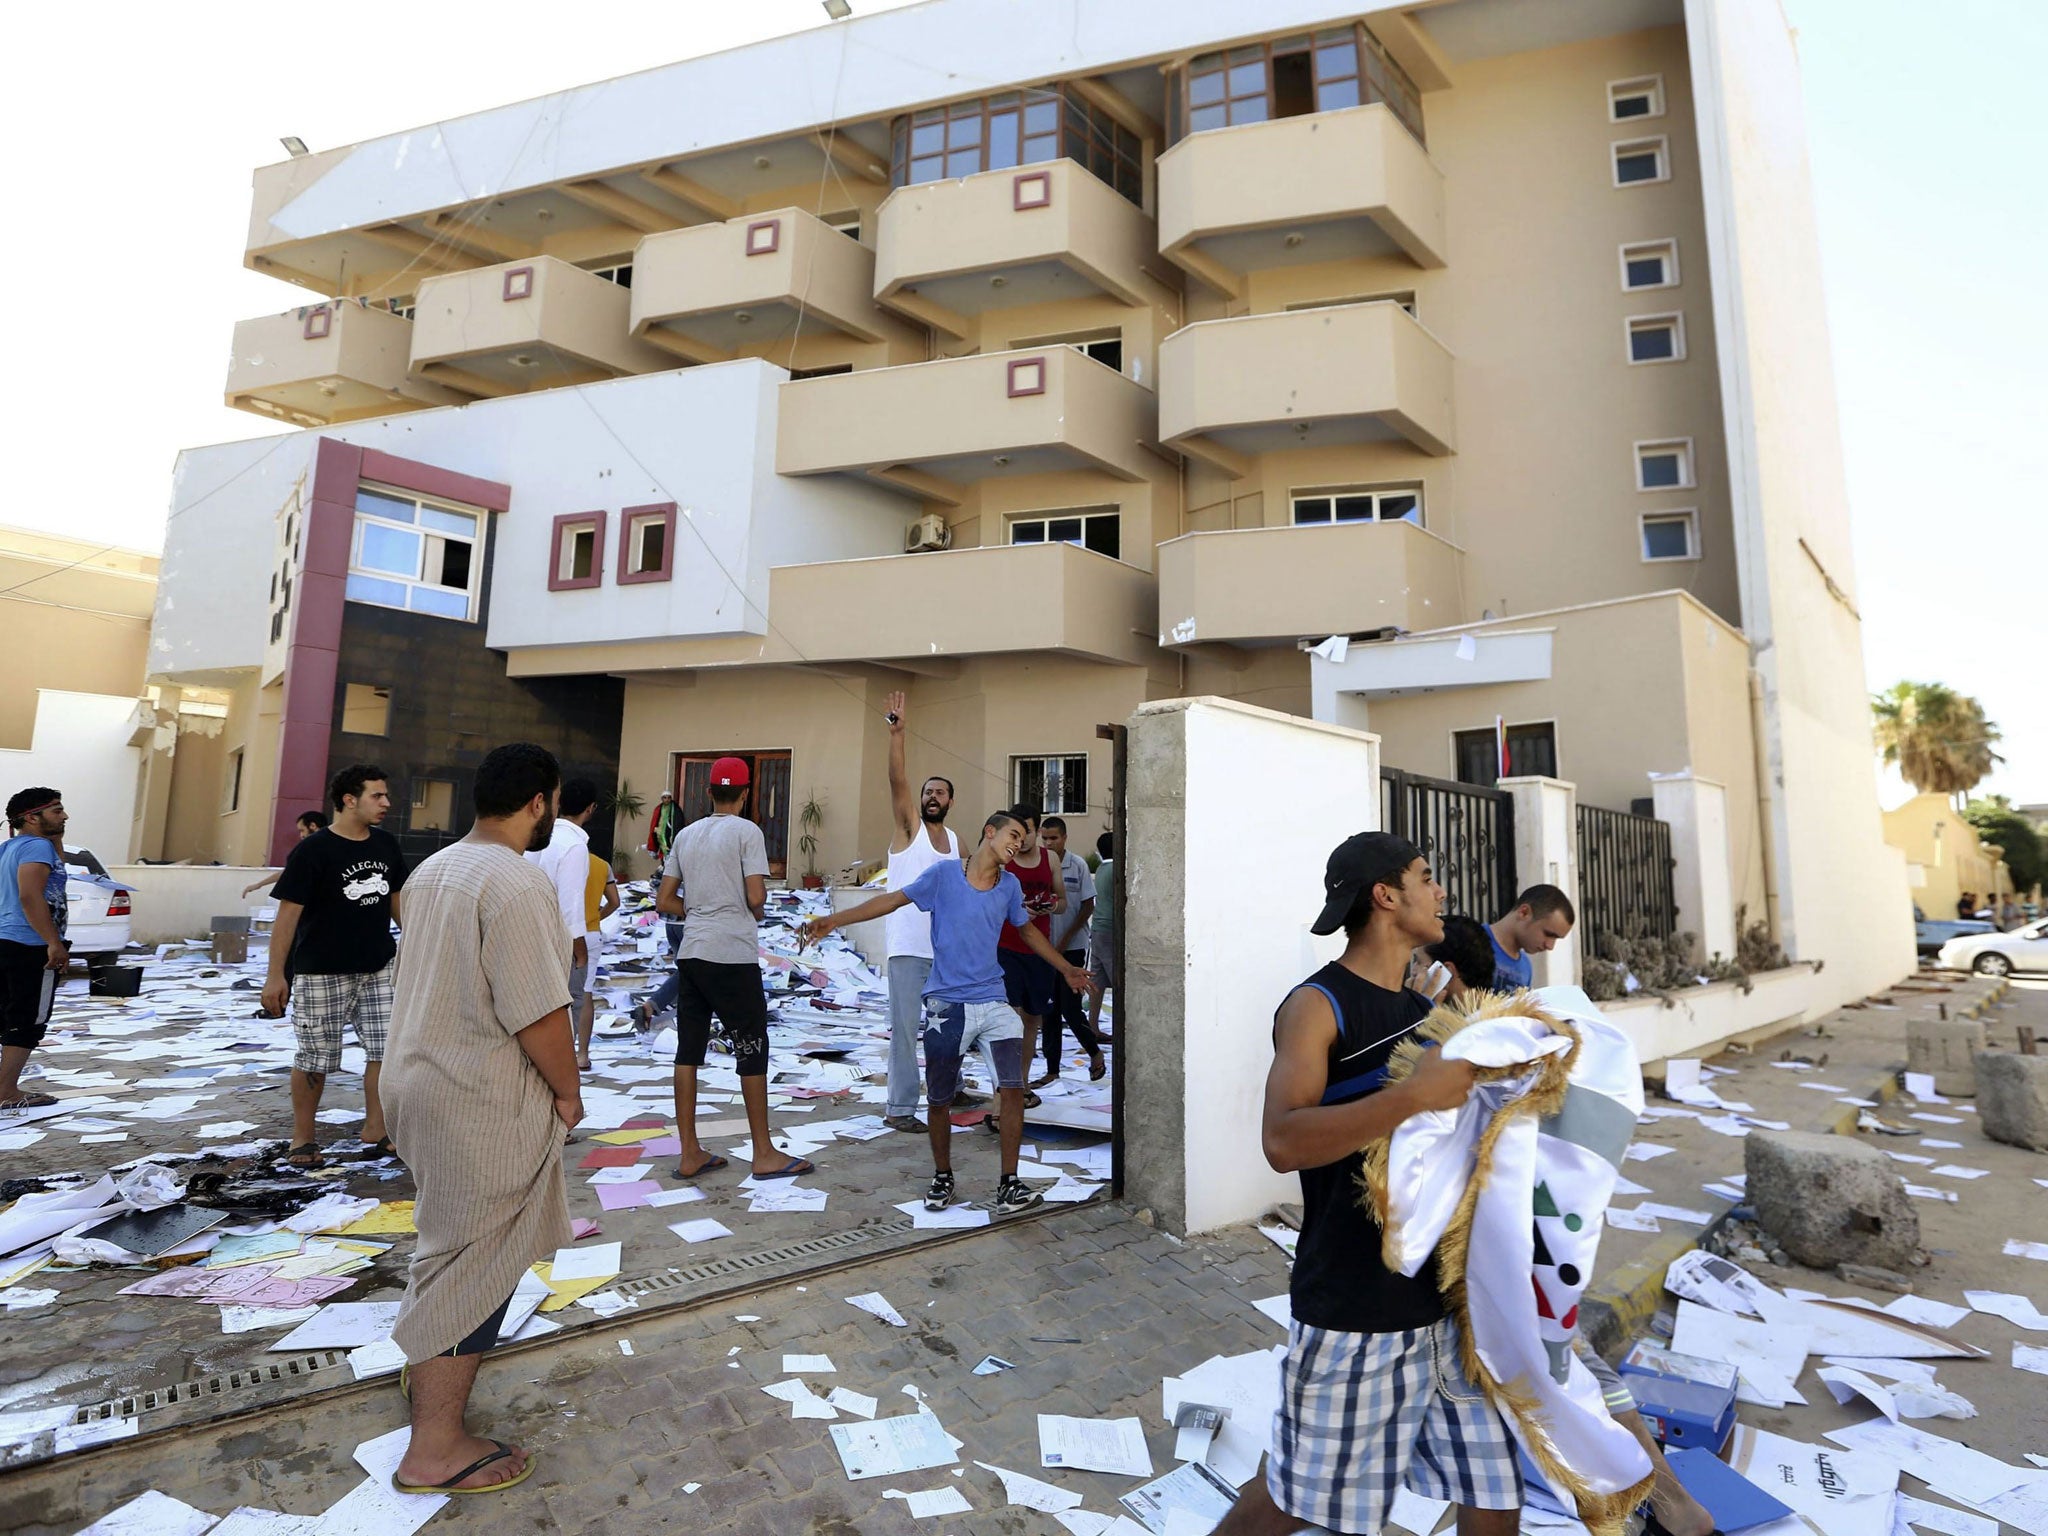 Libyan protesters stand amidst scattered documents after ransacking the headquarters of the liberal National Forces Alliance (NFA), the country's biggest political party founded by wartime rebel prime minister Mahmoud Jibril